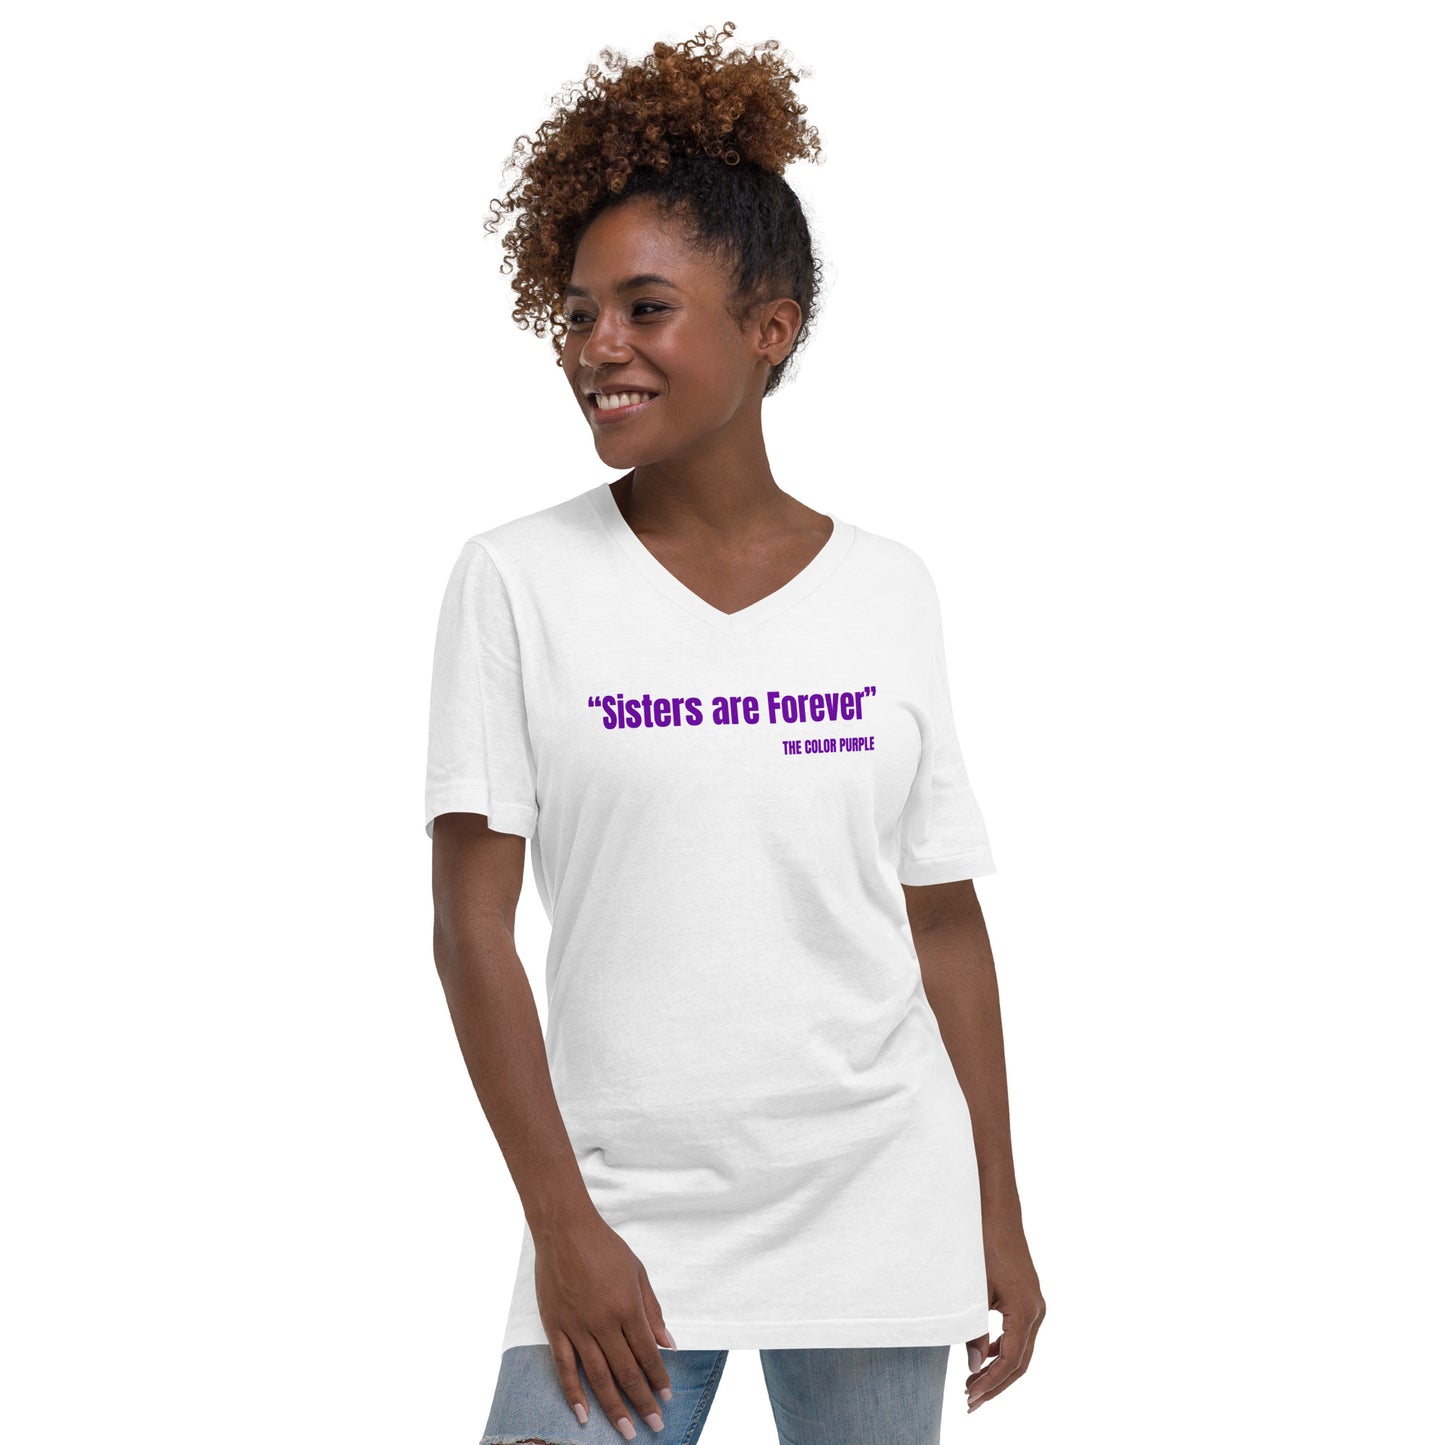 "Sisters Are Forever" The Color Purple Quote Unisex Short Sleeve V-Neck T-Shirt